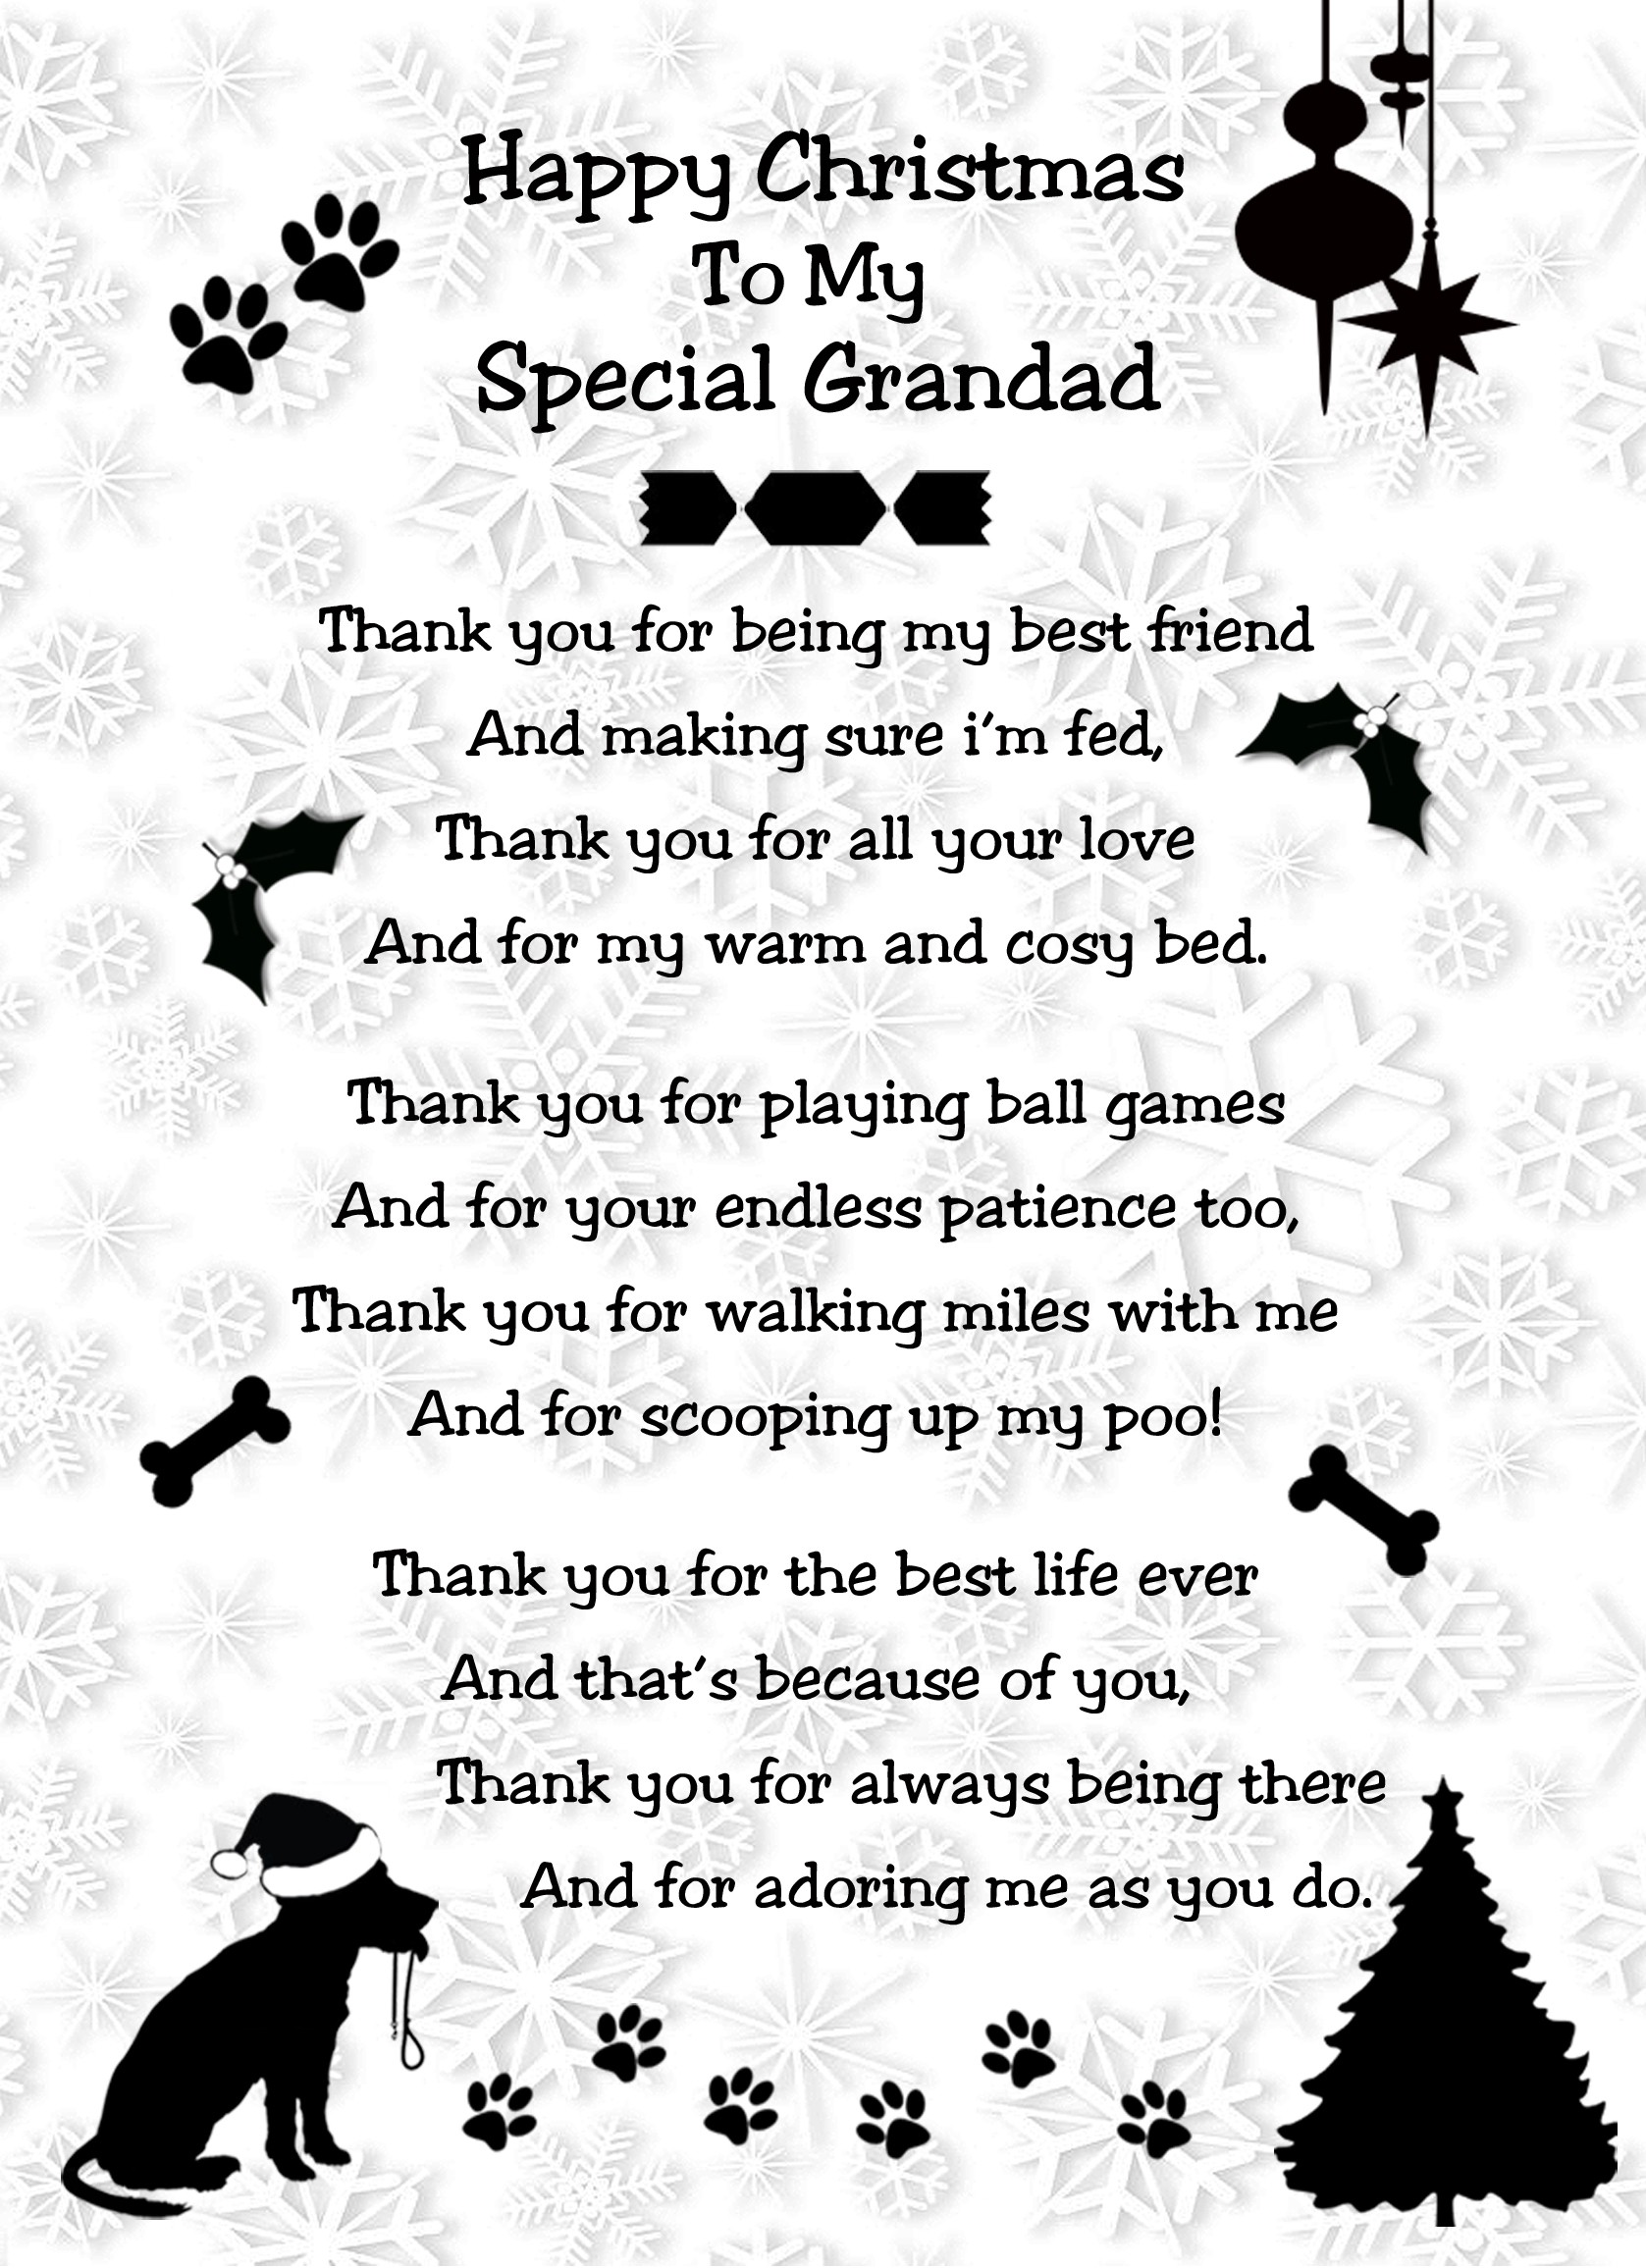 From The Dog Verse Poem Christmas Card (Special Grandad, White, Happy Christmas)